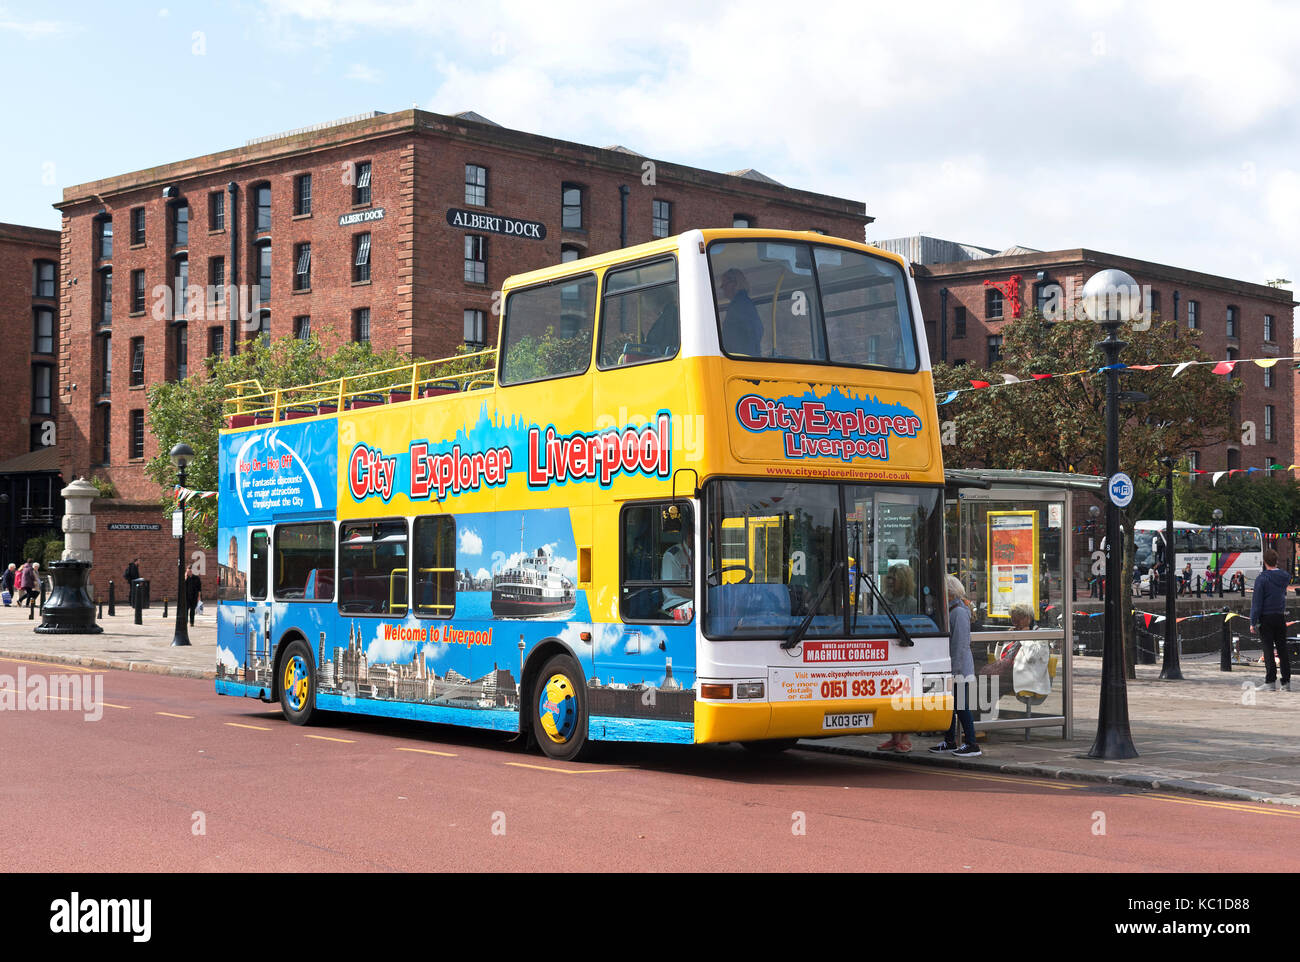 a tourist sightseeing tour bus at the albert dock in liverpool, england, britain, uk. Stock Photo